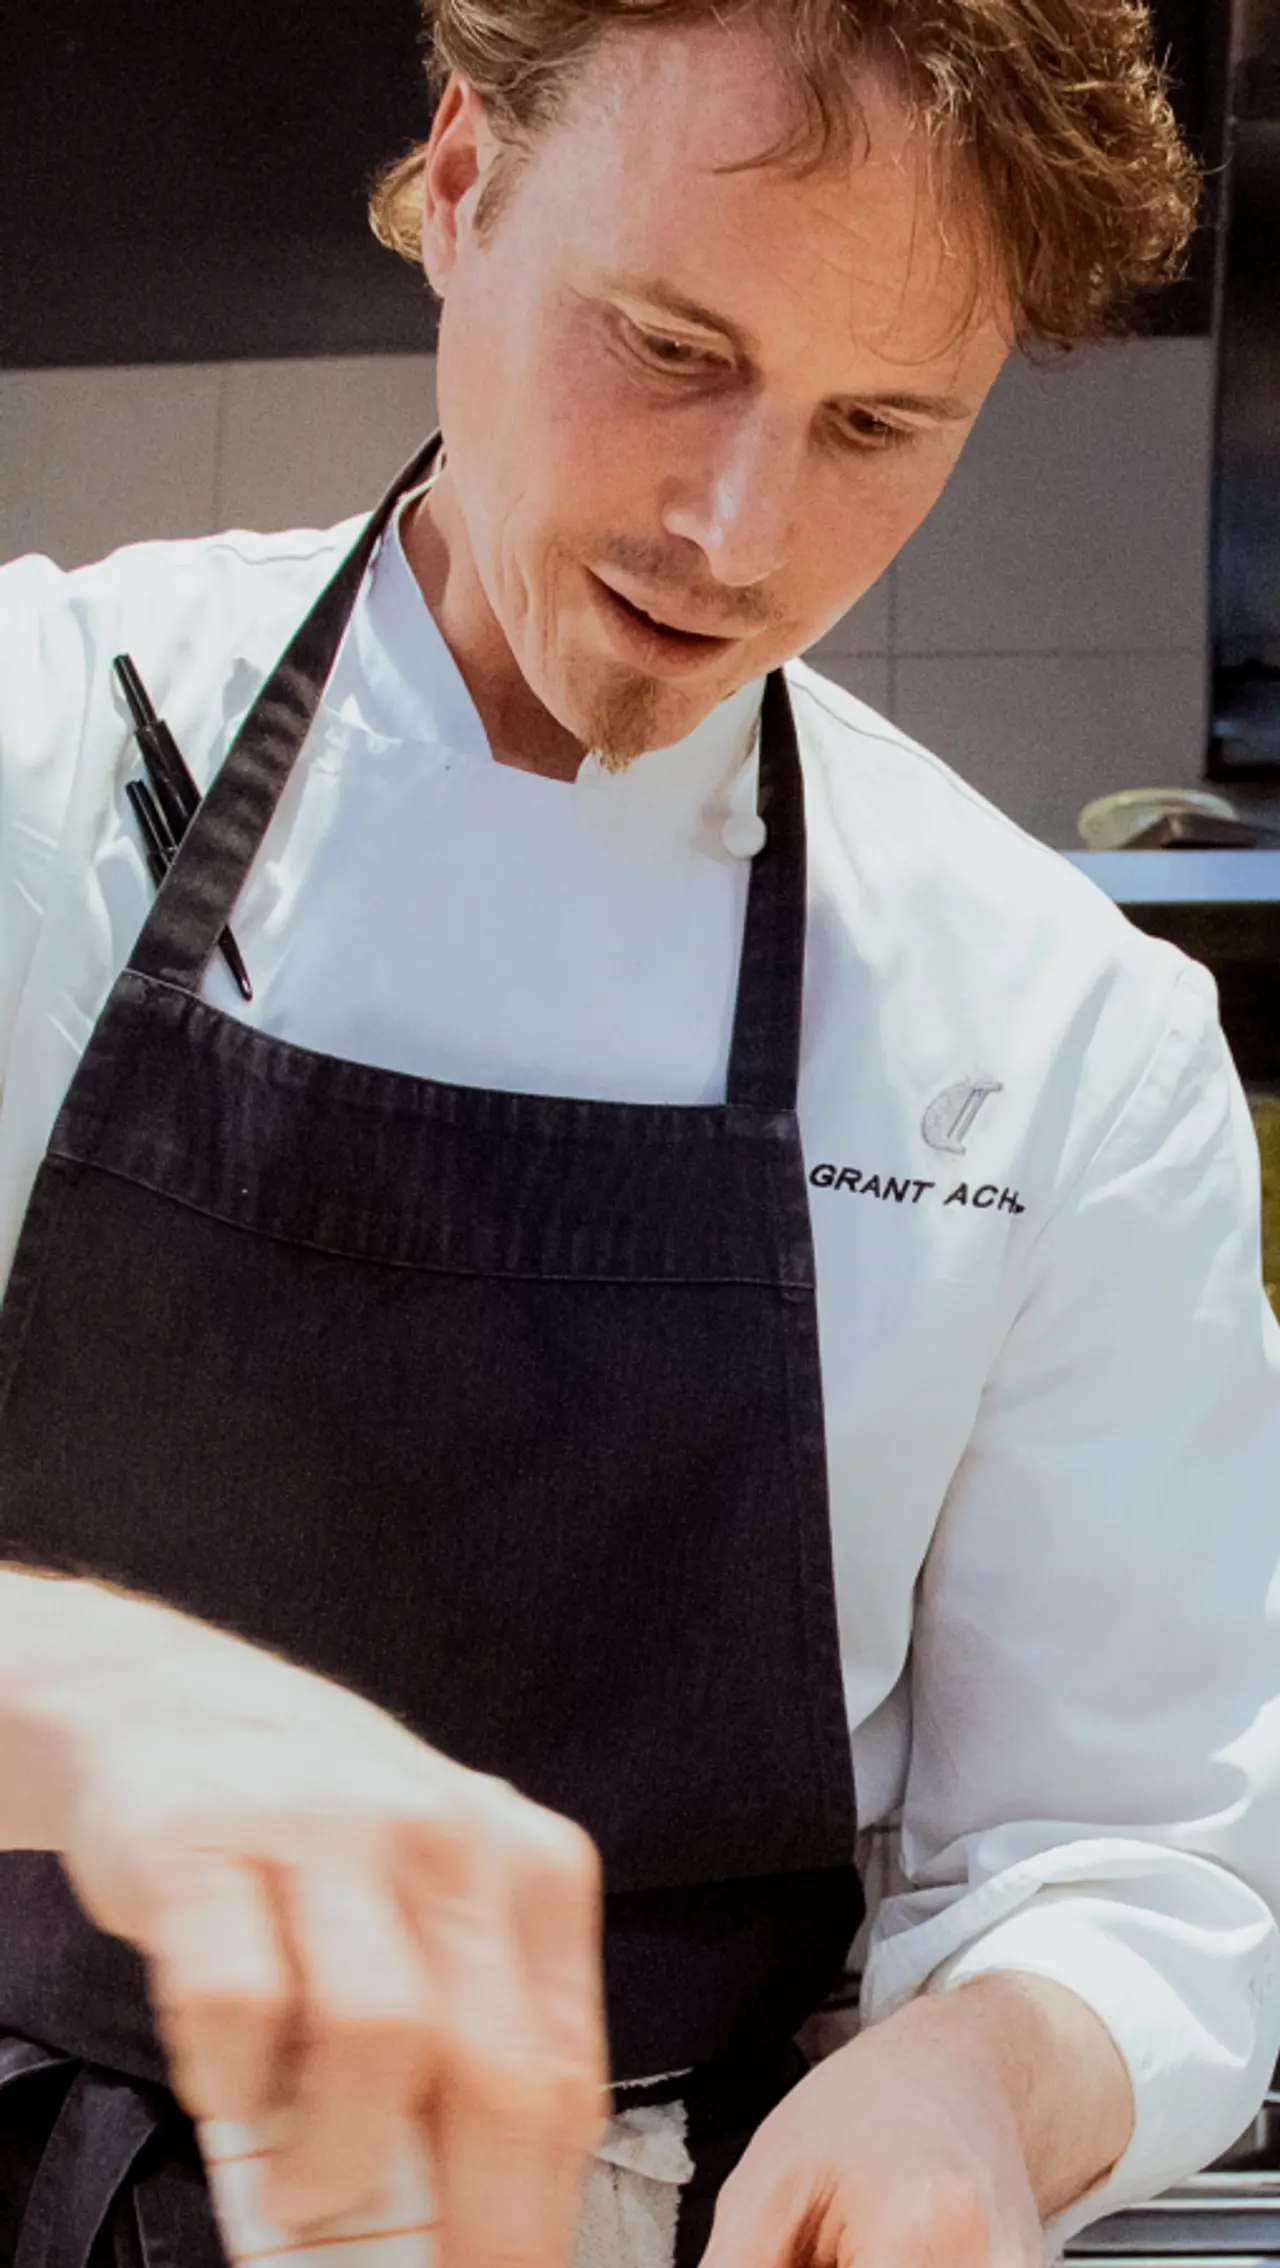 A chef in a white jacket and dark apron, with his name embroidered on it, is focused on preparing food.